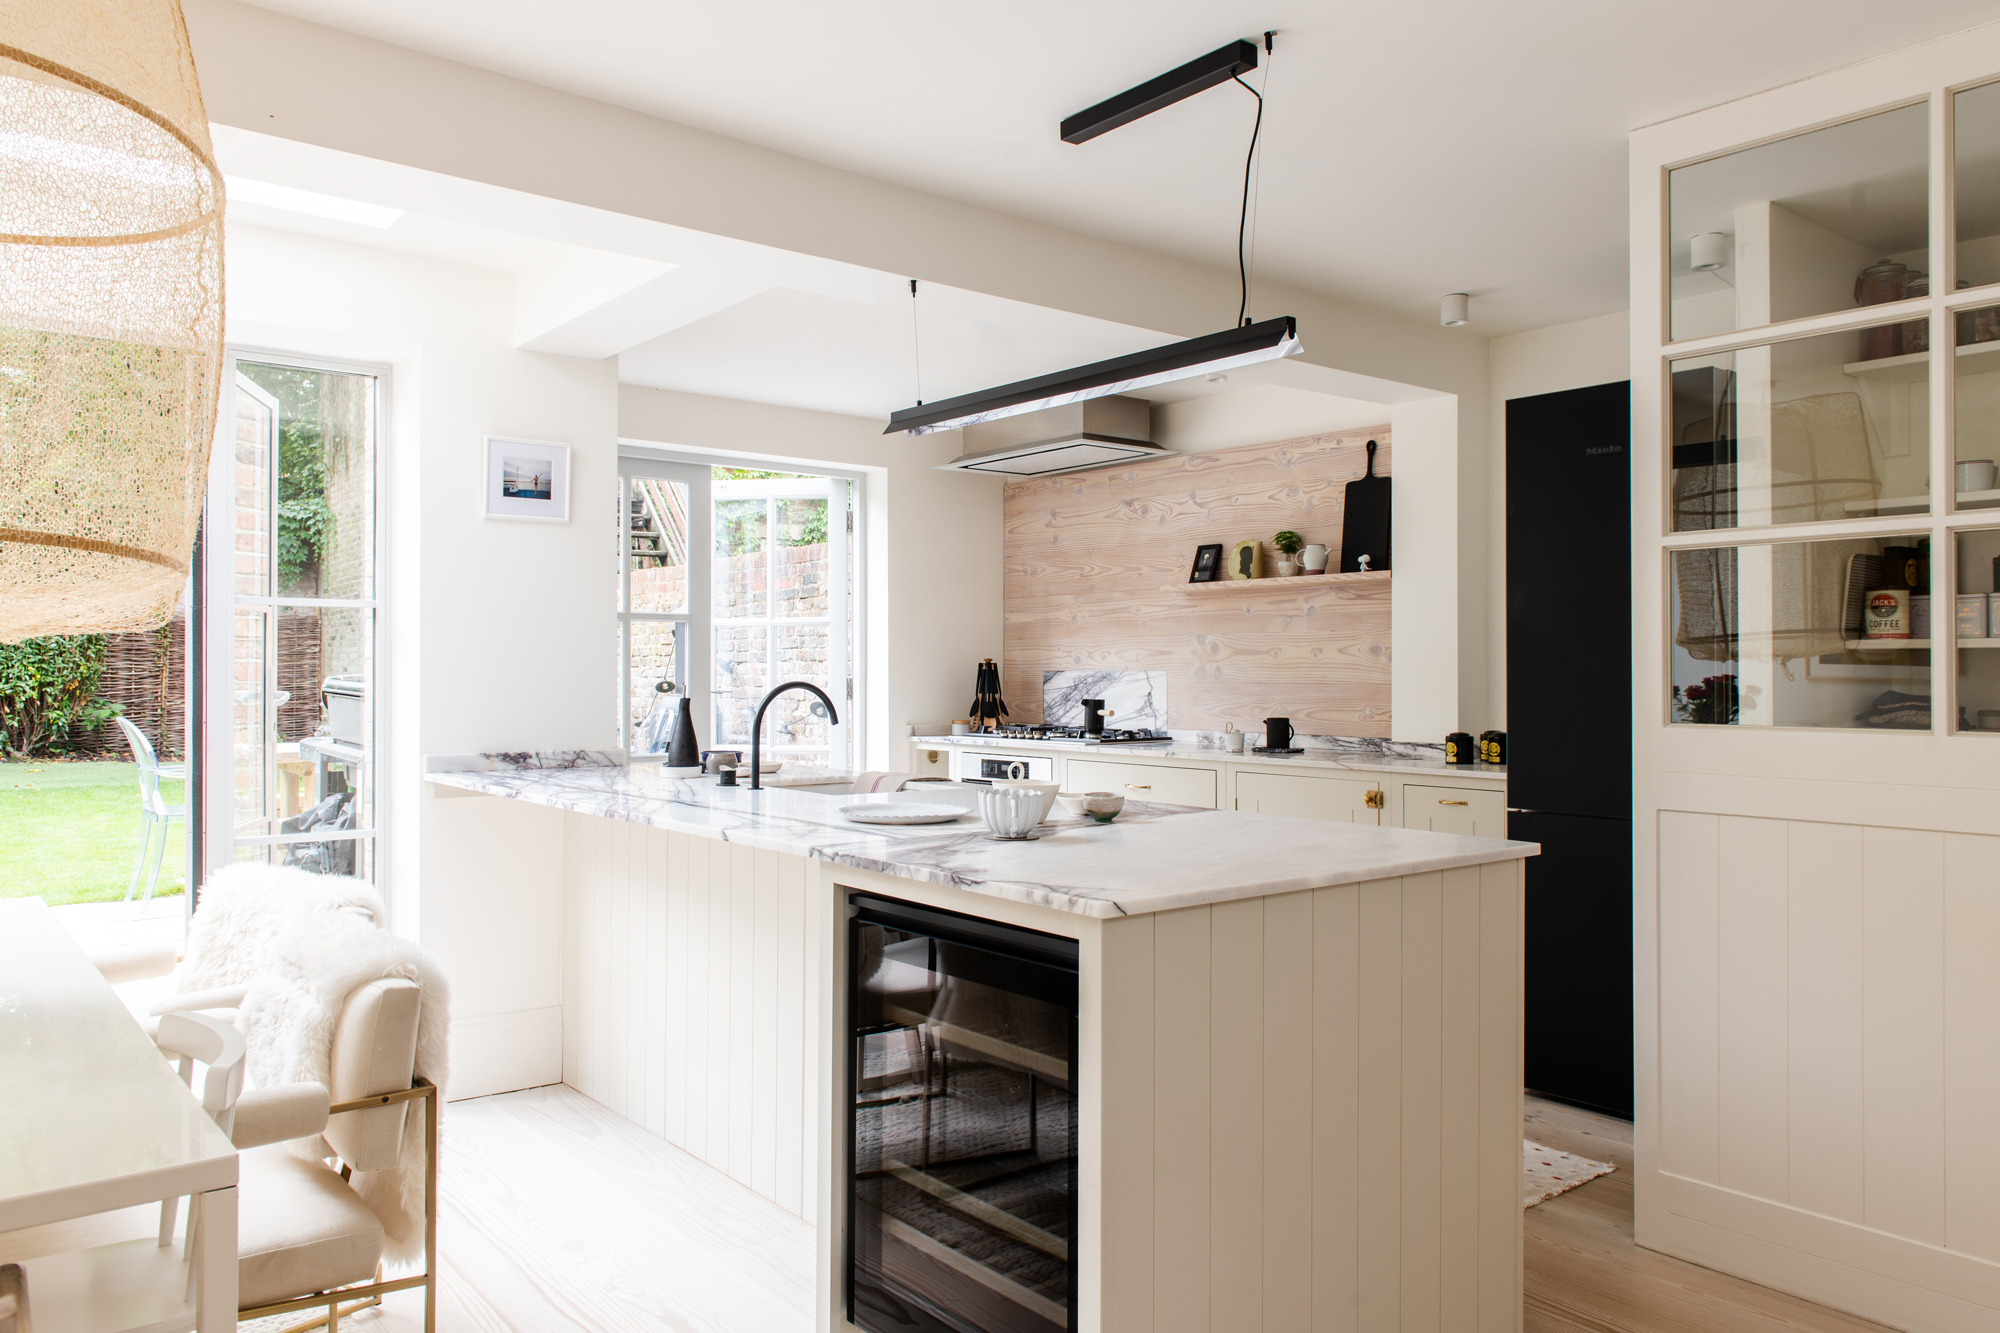 How Much Does A New Kitchen Cost, How Much Does A Kitchen Designer Earn Uk